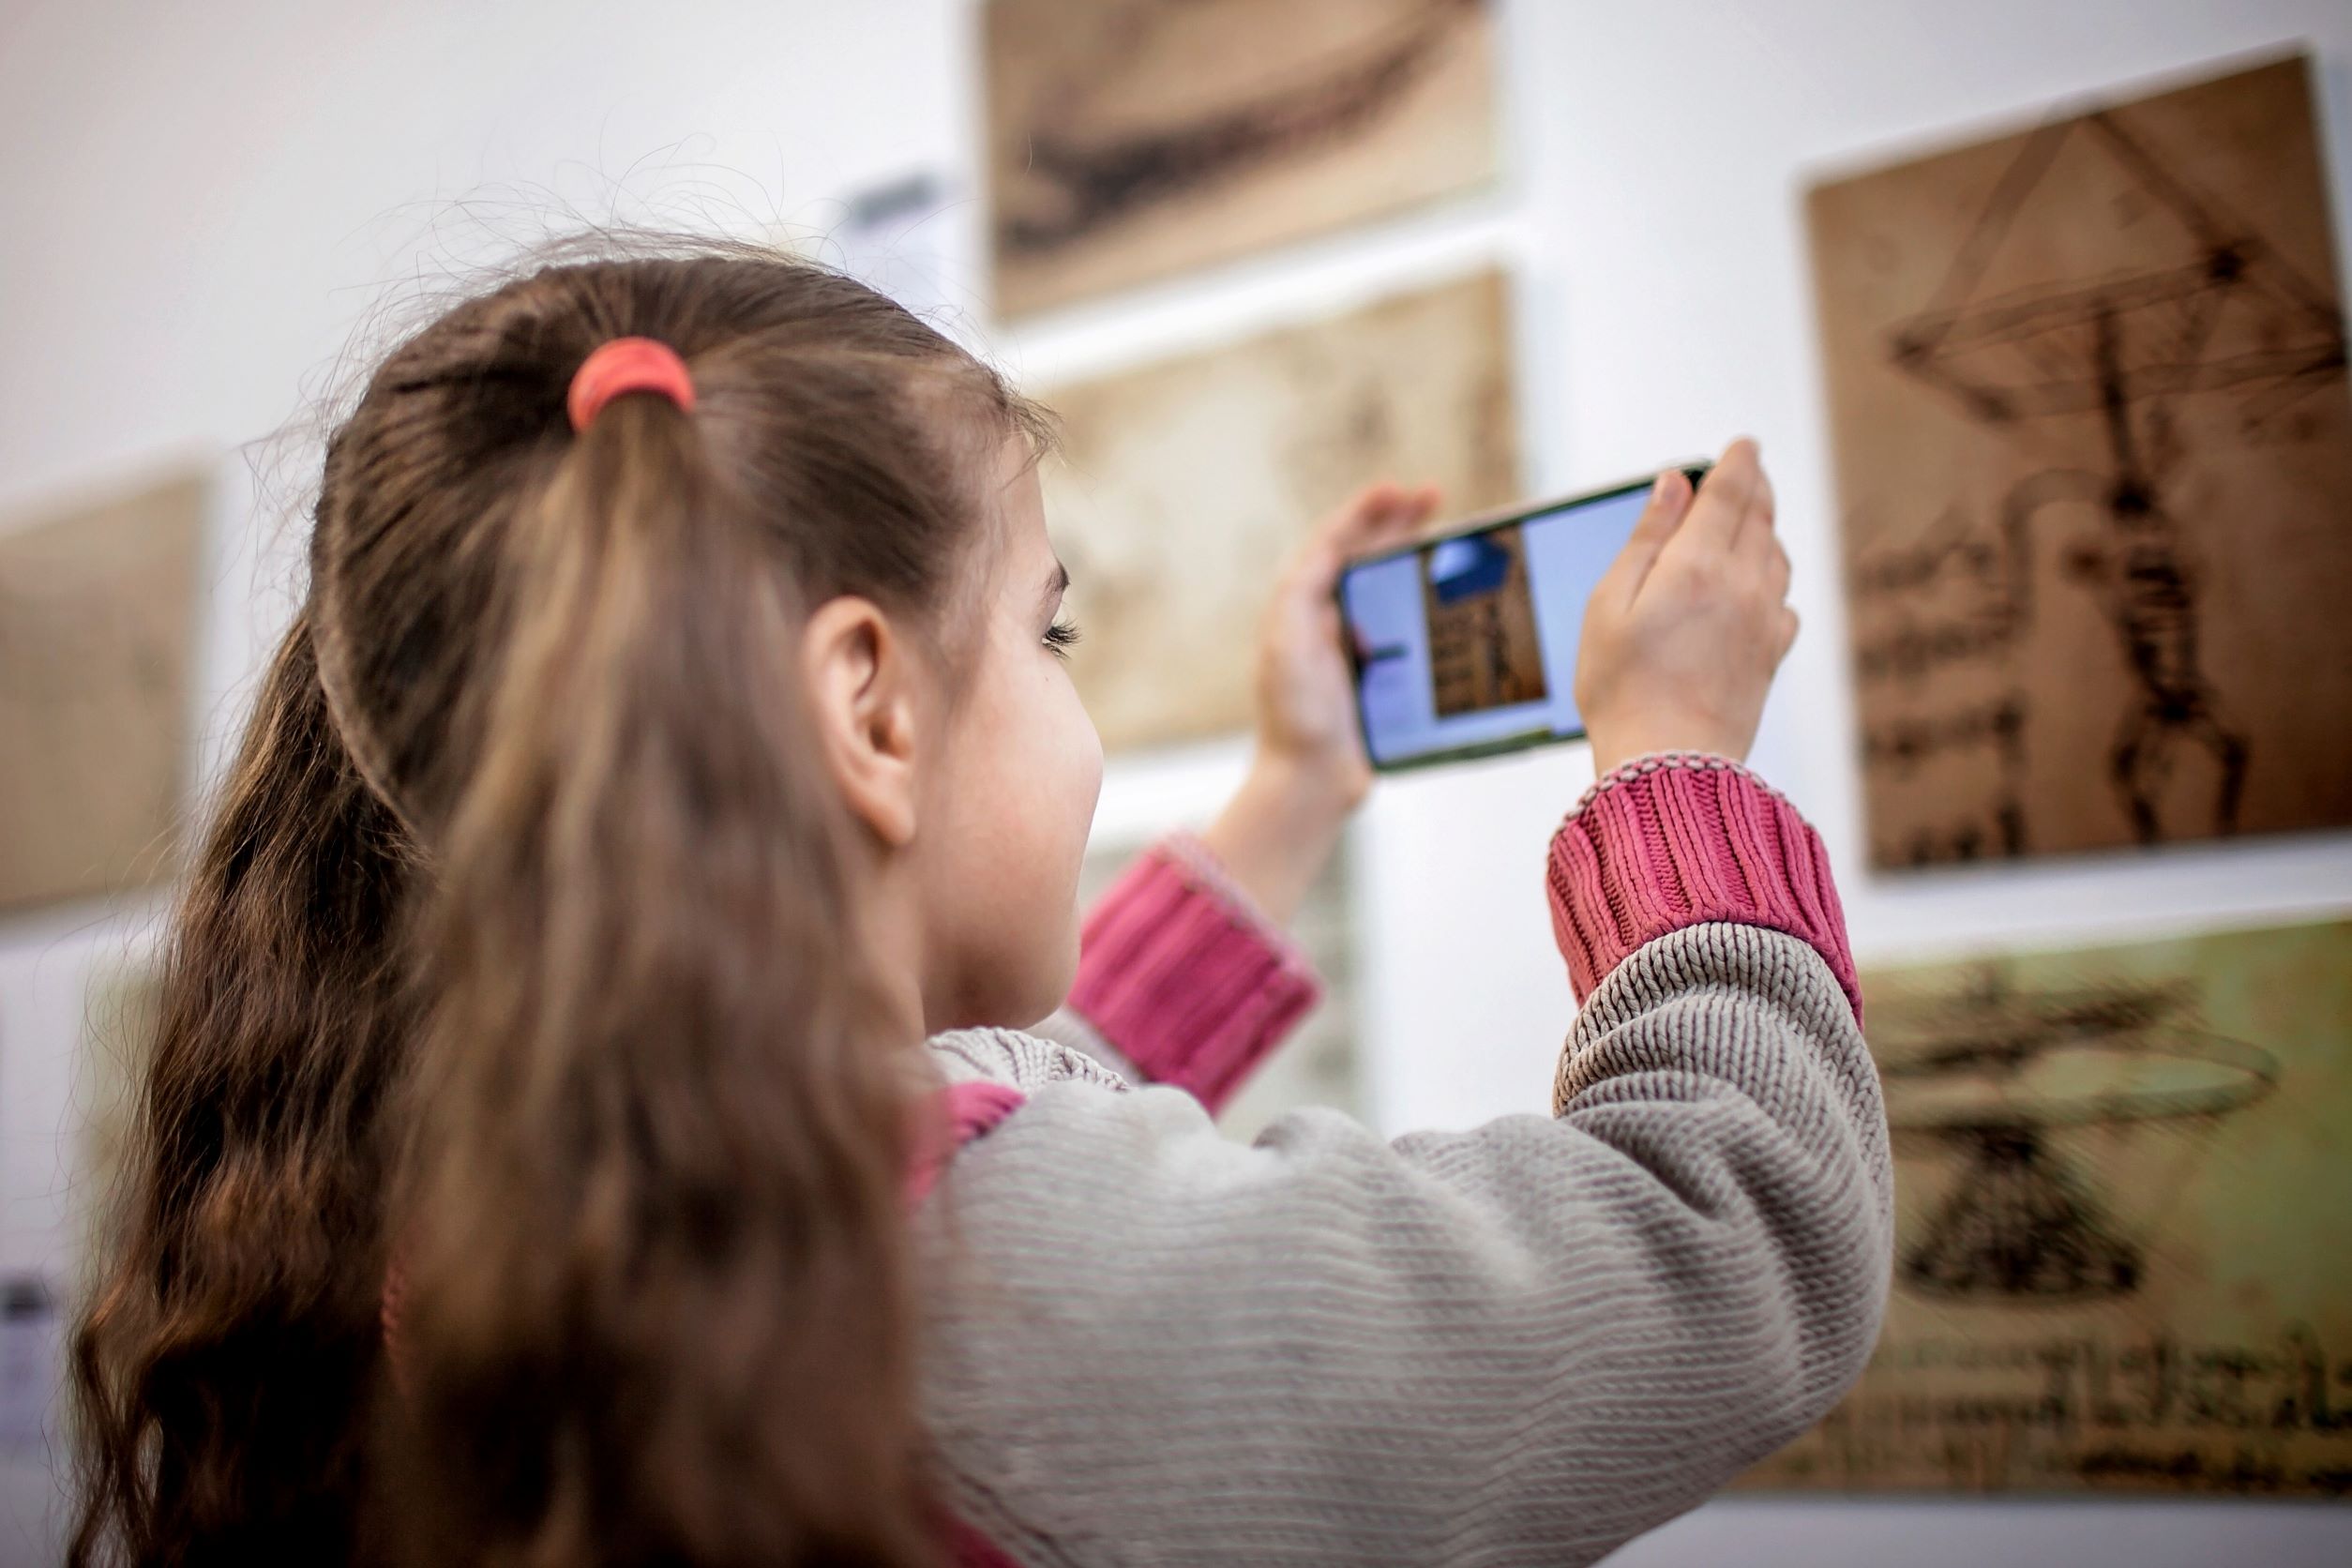 Young girl looking at art in a museum through an AR app on her smartphone